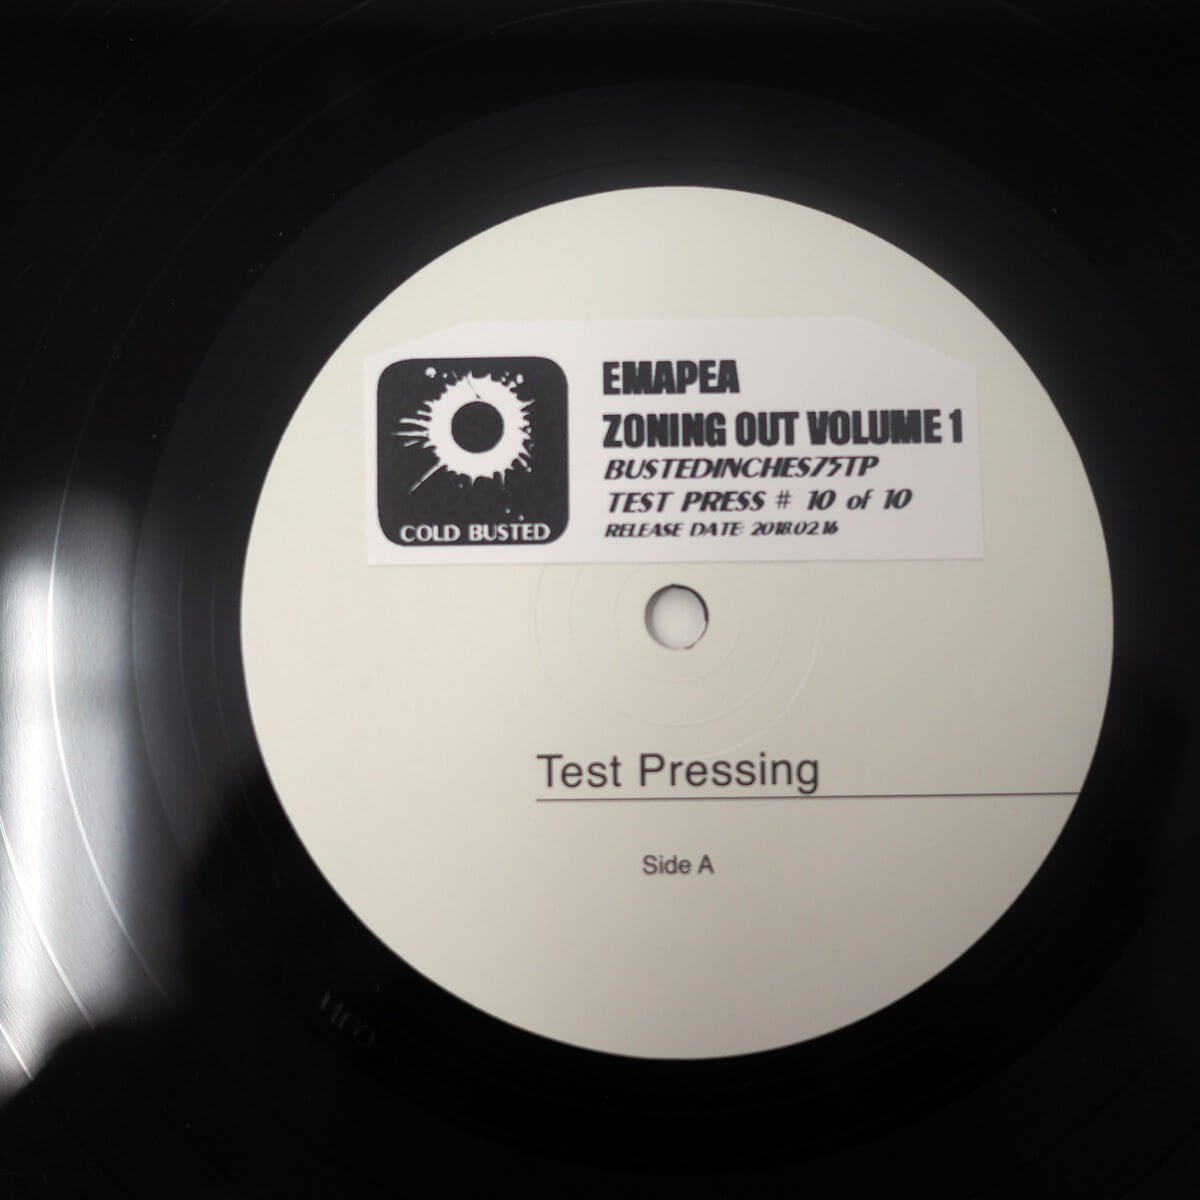 Emapea - Zoning Out Volume 1 - Limited Edition 12 Inch Vinyl + Autographed Flexi-disc Test Pressings - Cold Busted